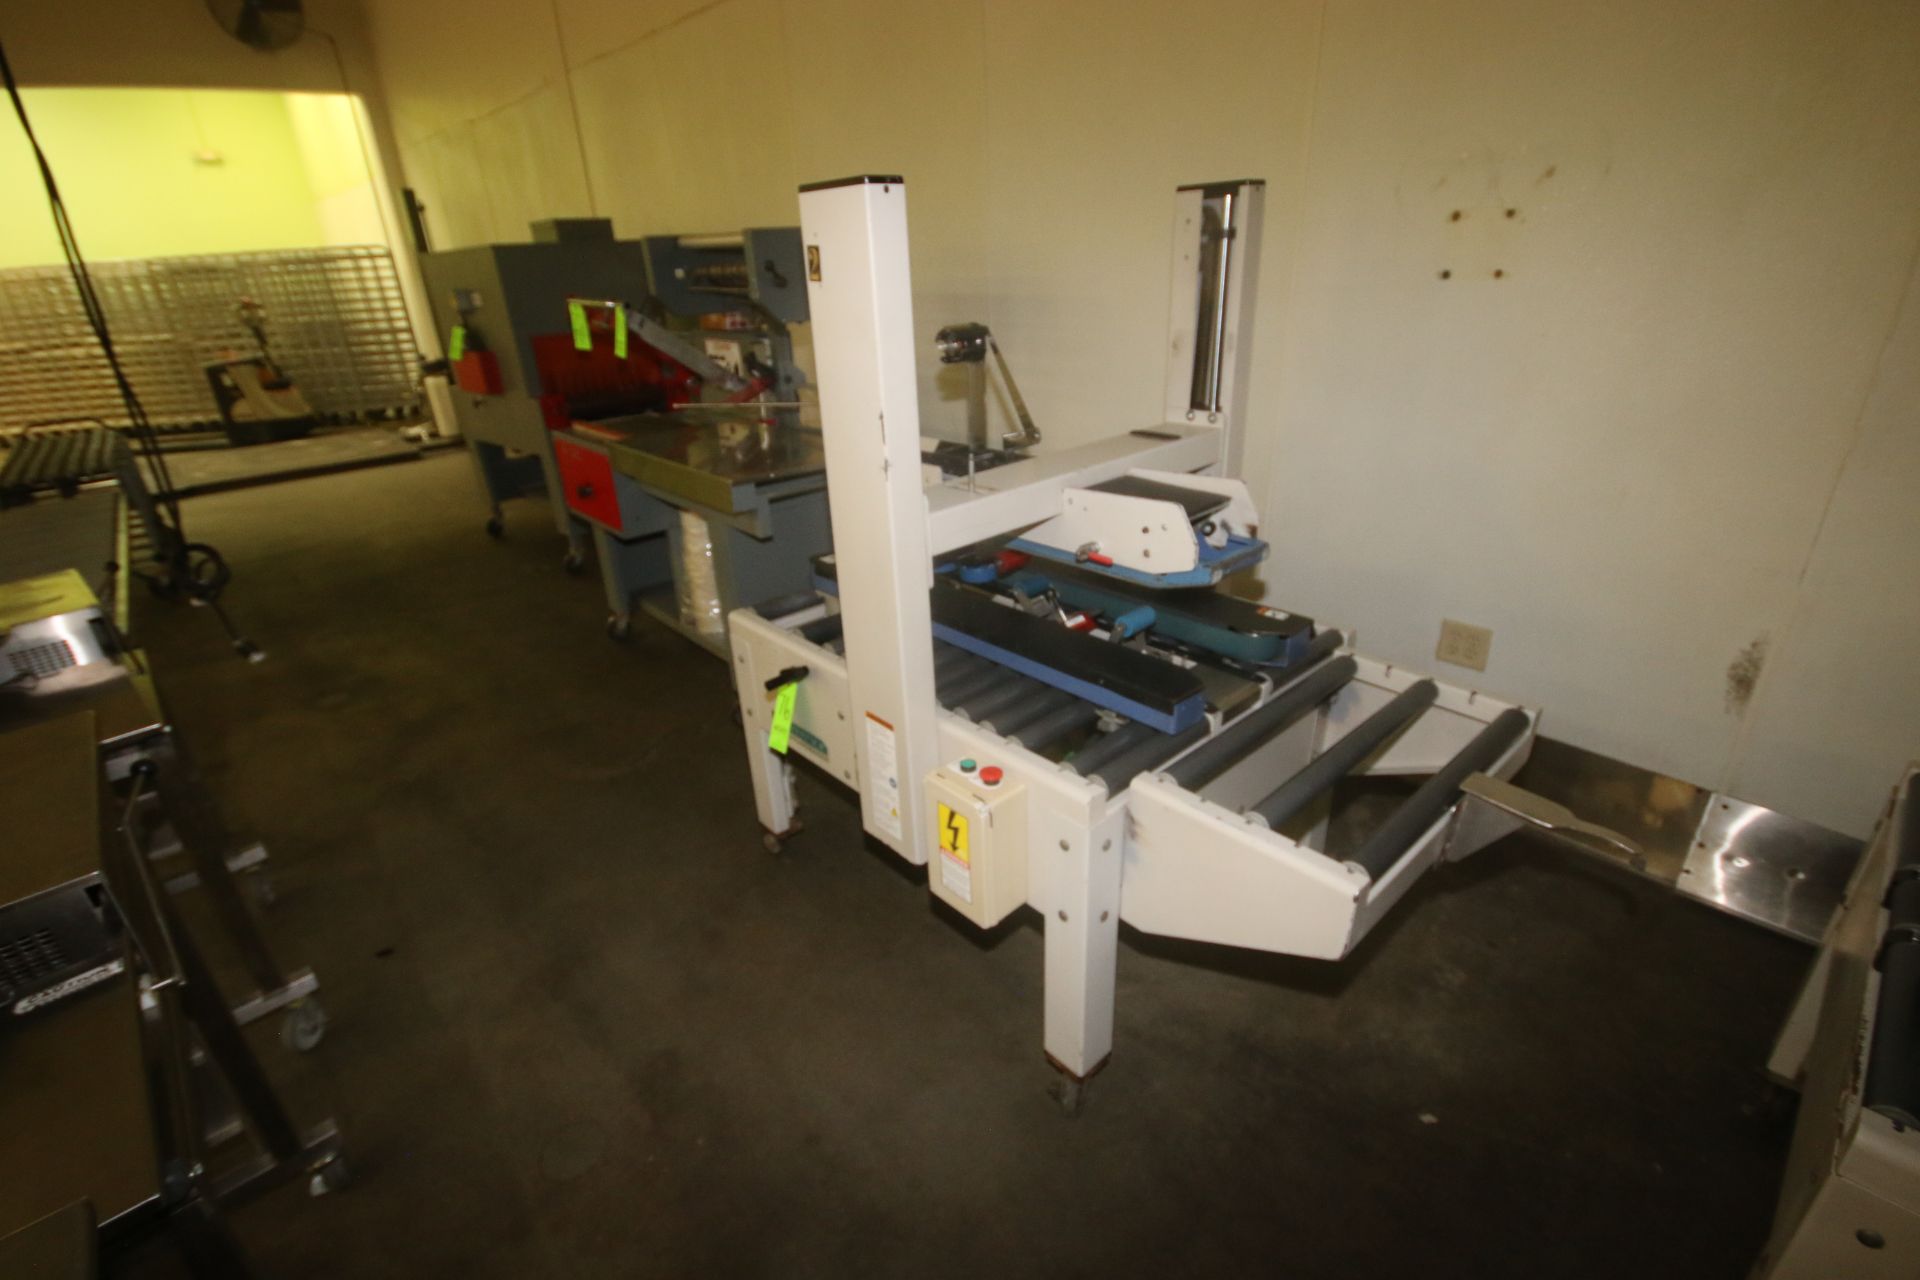 InterPack Top & Bottom Case Sealer, M/N USA 2024-SB/3, S/N H03 T544 007, 115 Volts, 1 Phase, with - Image 2 of 5